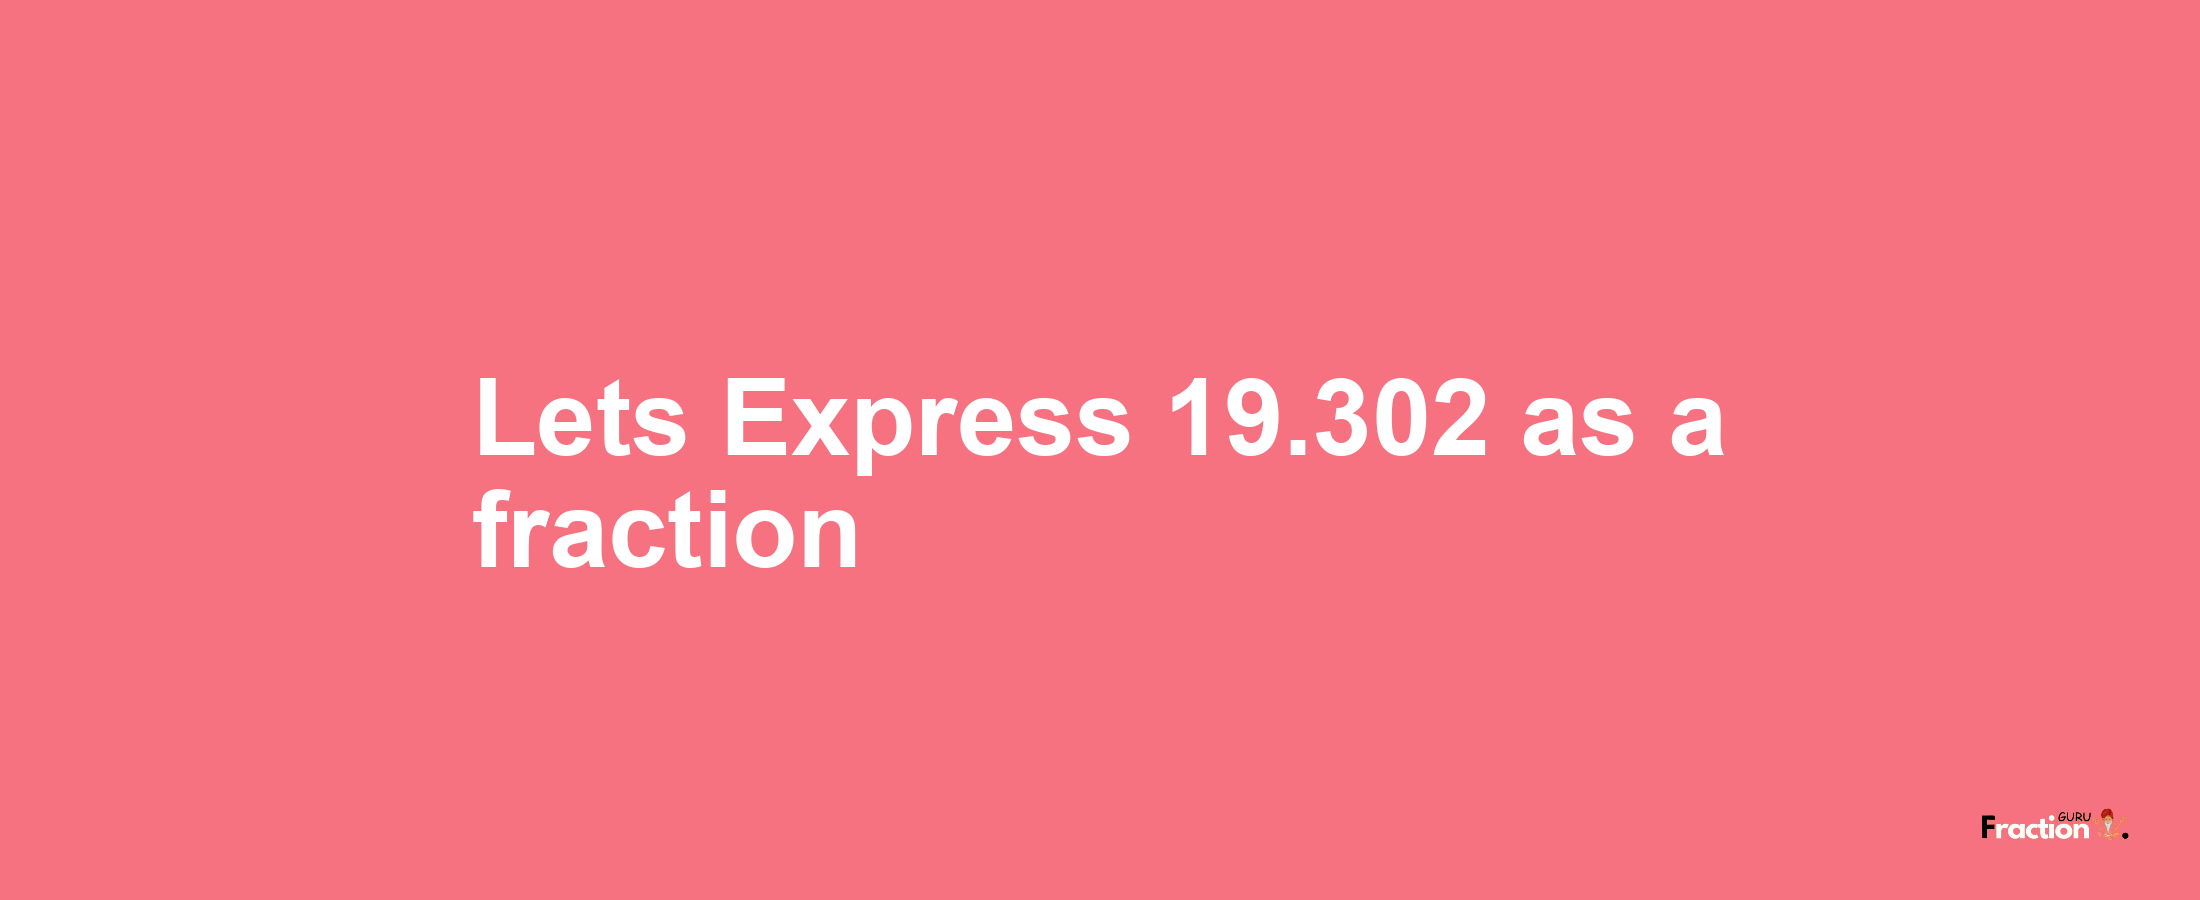 Lets Express 19.302 as afraction